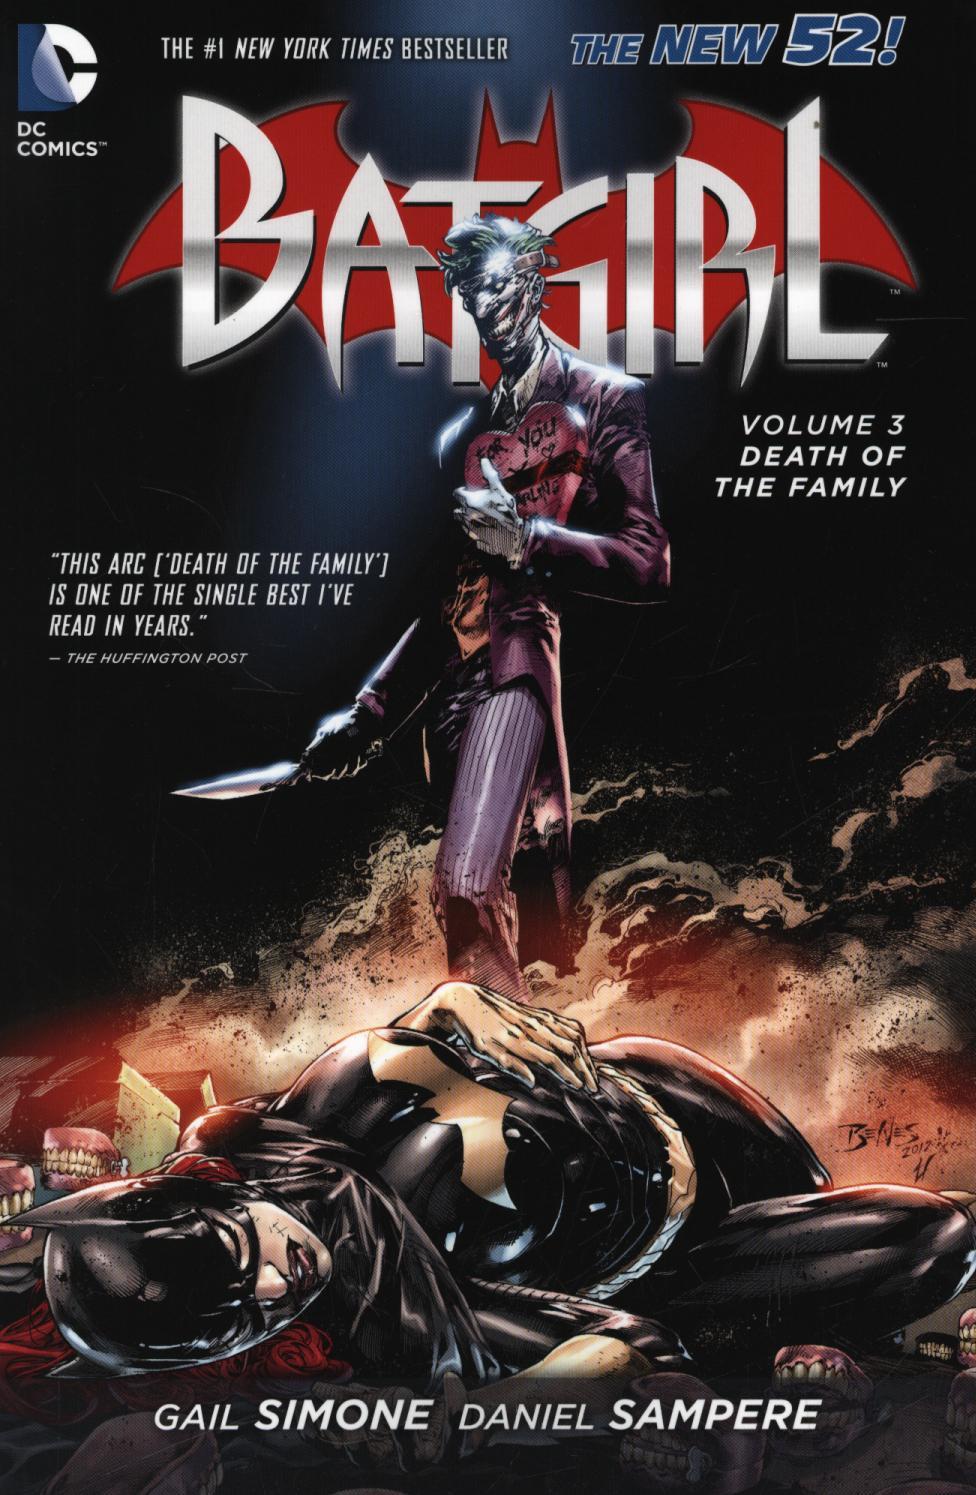 Batgirl Vol. 3 Death Of The Family (The New 52) - Ed Benes